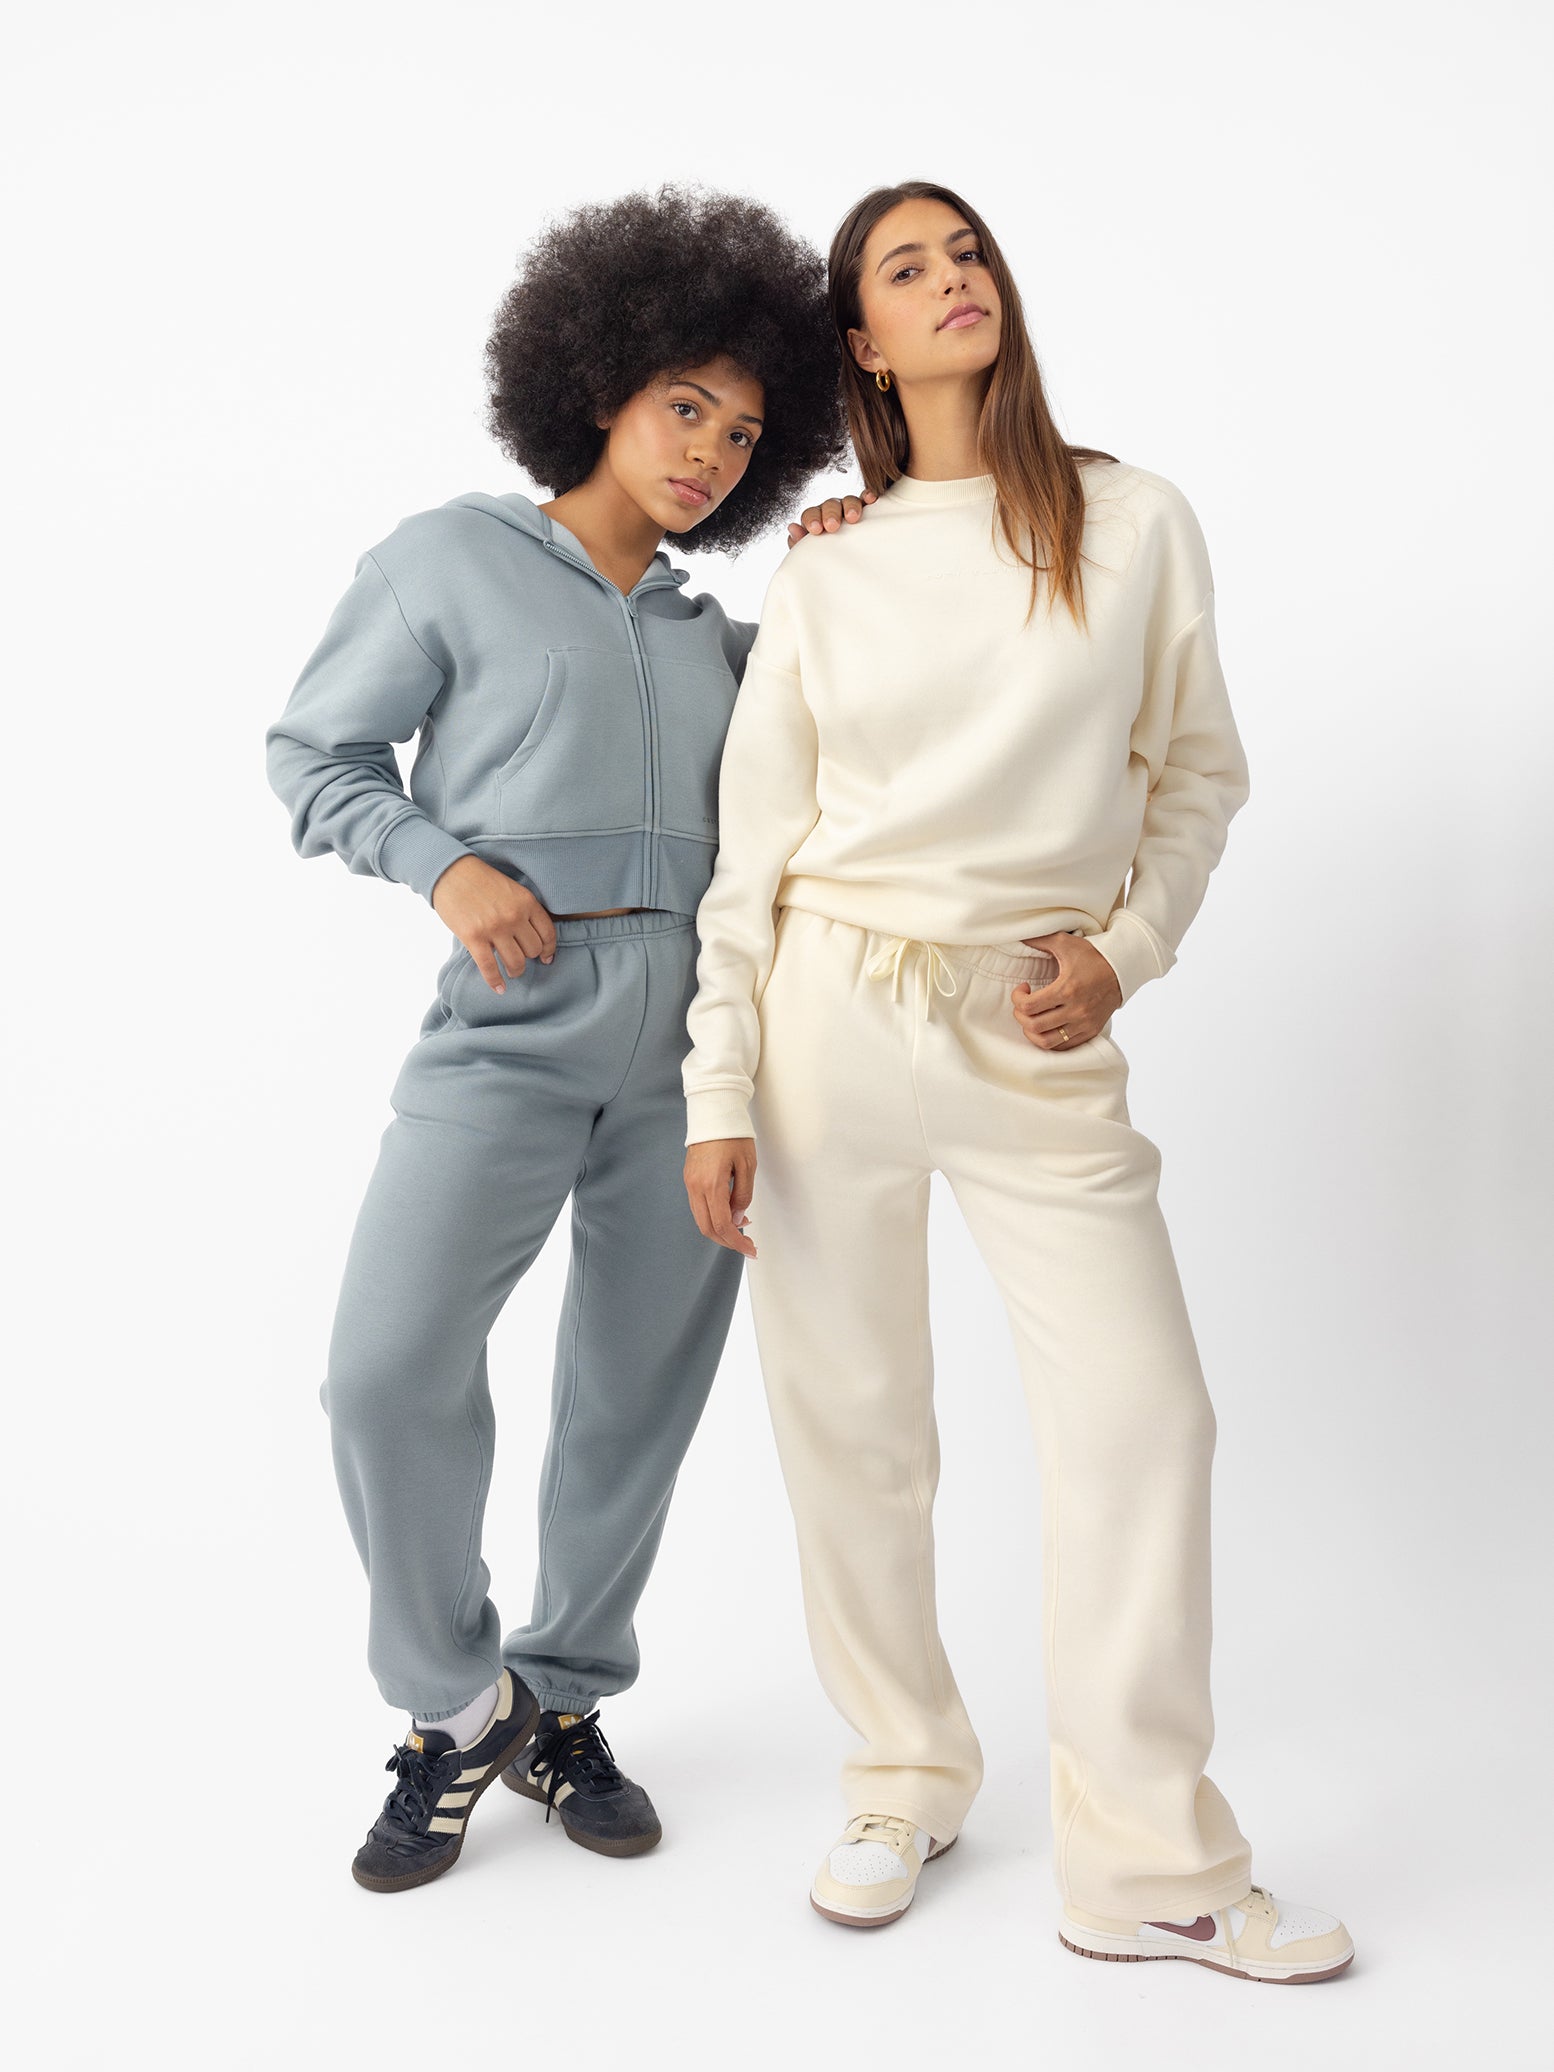 Women wearing Alabaster and Smokey Blue CityScape Crewneck with white background 